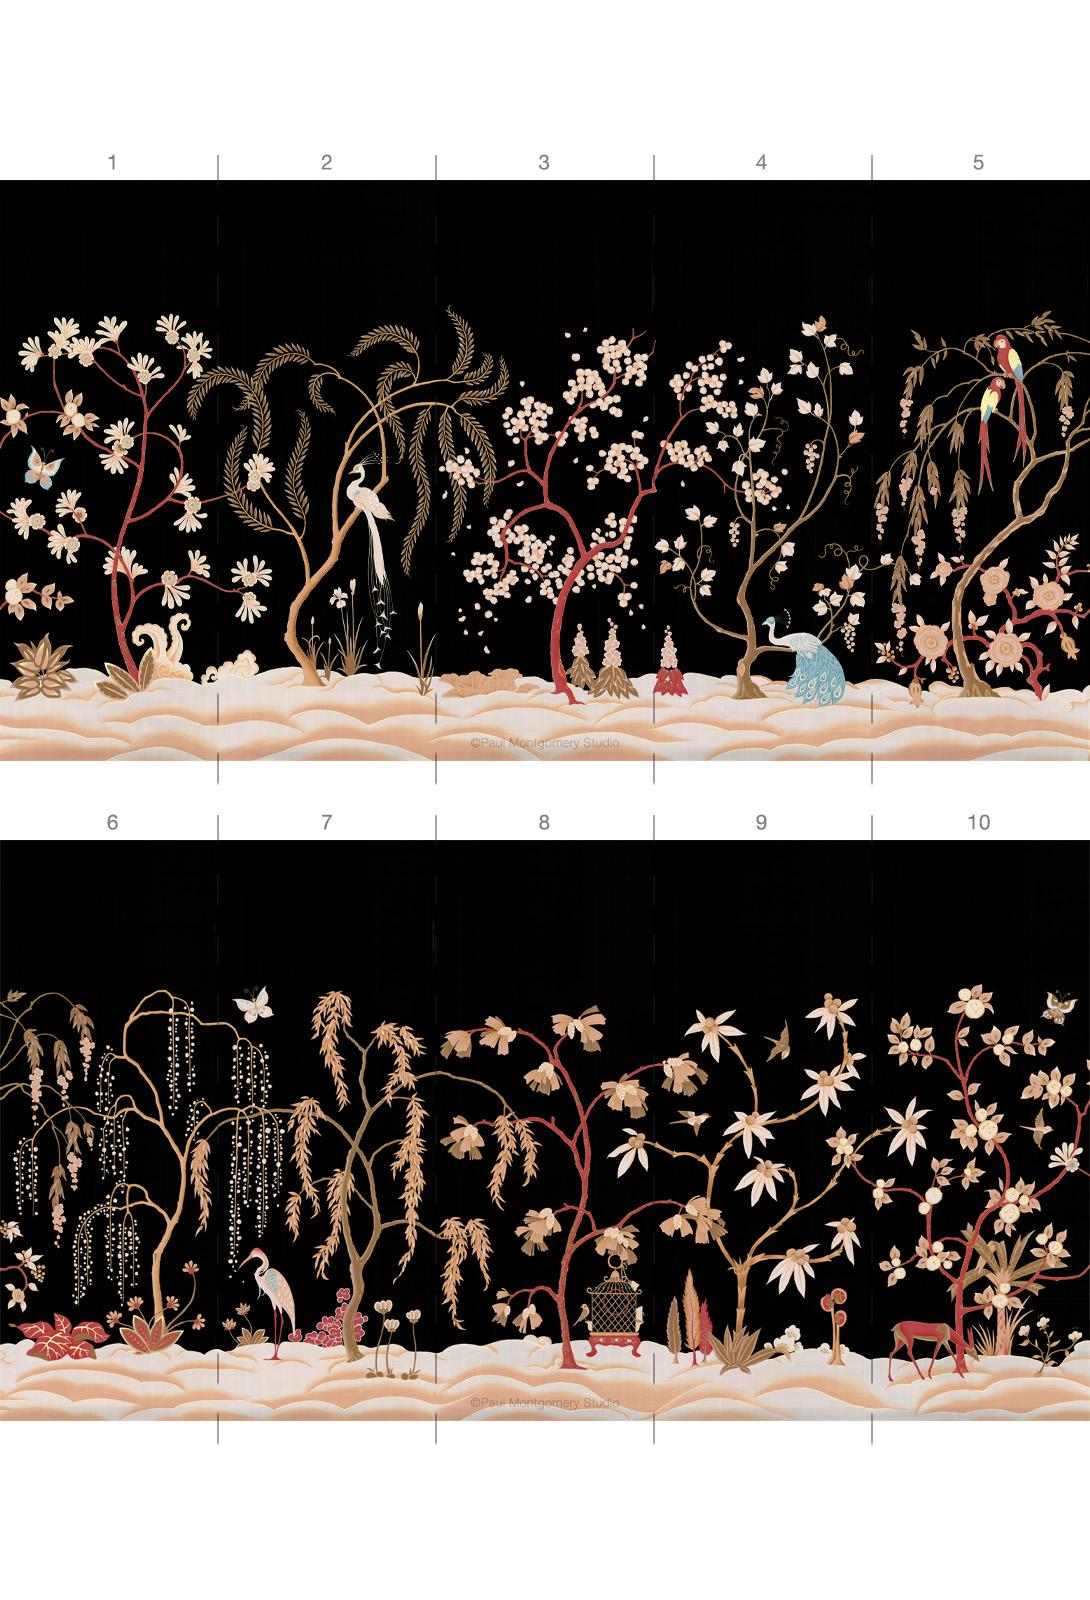 Ginsgerg is a Chinoiserie mural but rendered in the Art Deco style.  Each panel is delicately hand-painted on a lustrous black silk with creams reds, and shining gold paints.  Consisting of 10 consecutive three foot wide panels, the full mural fills